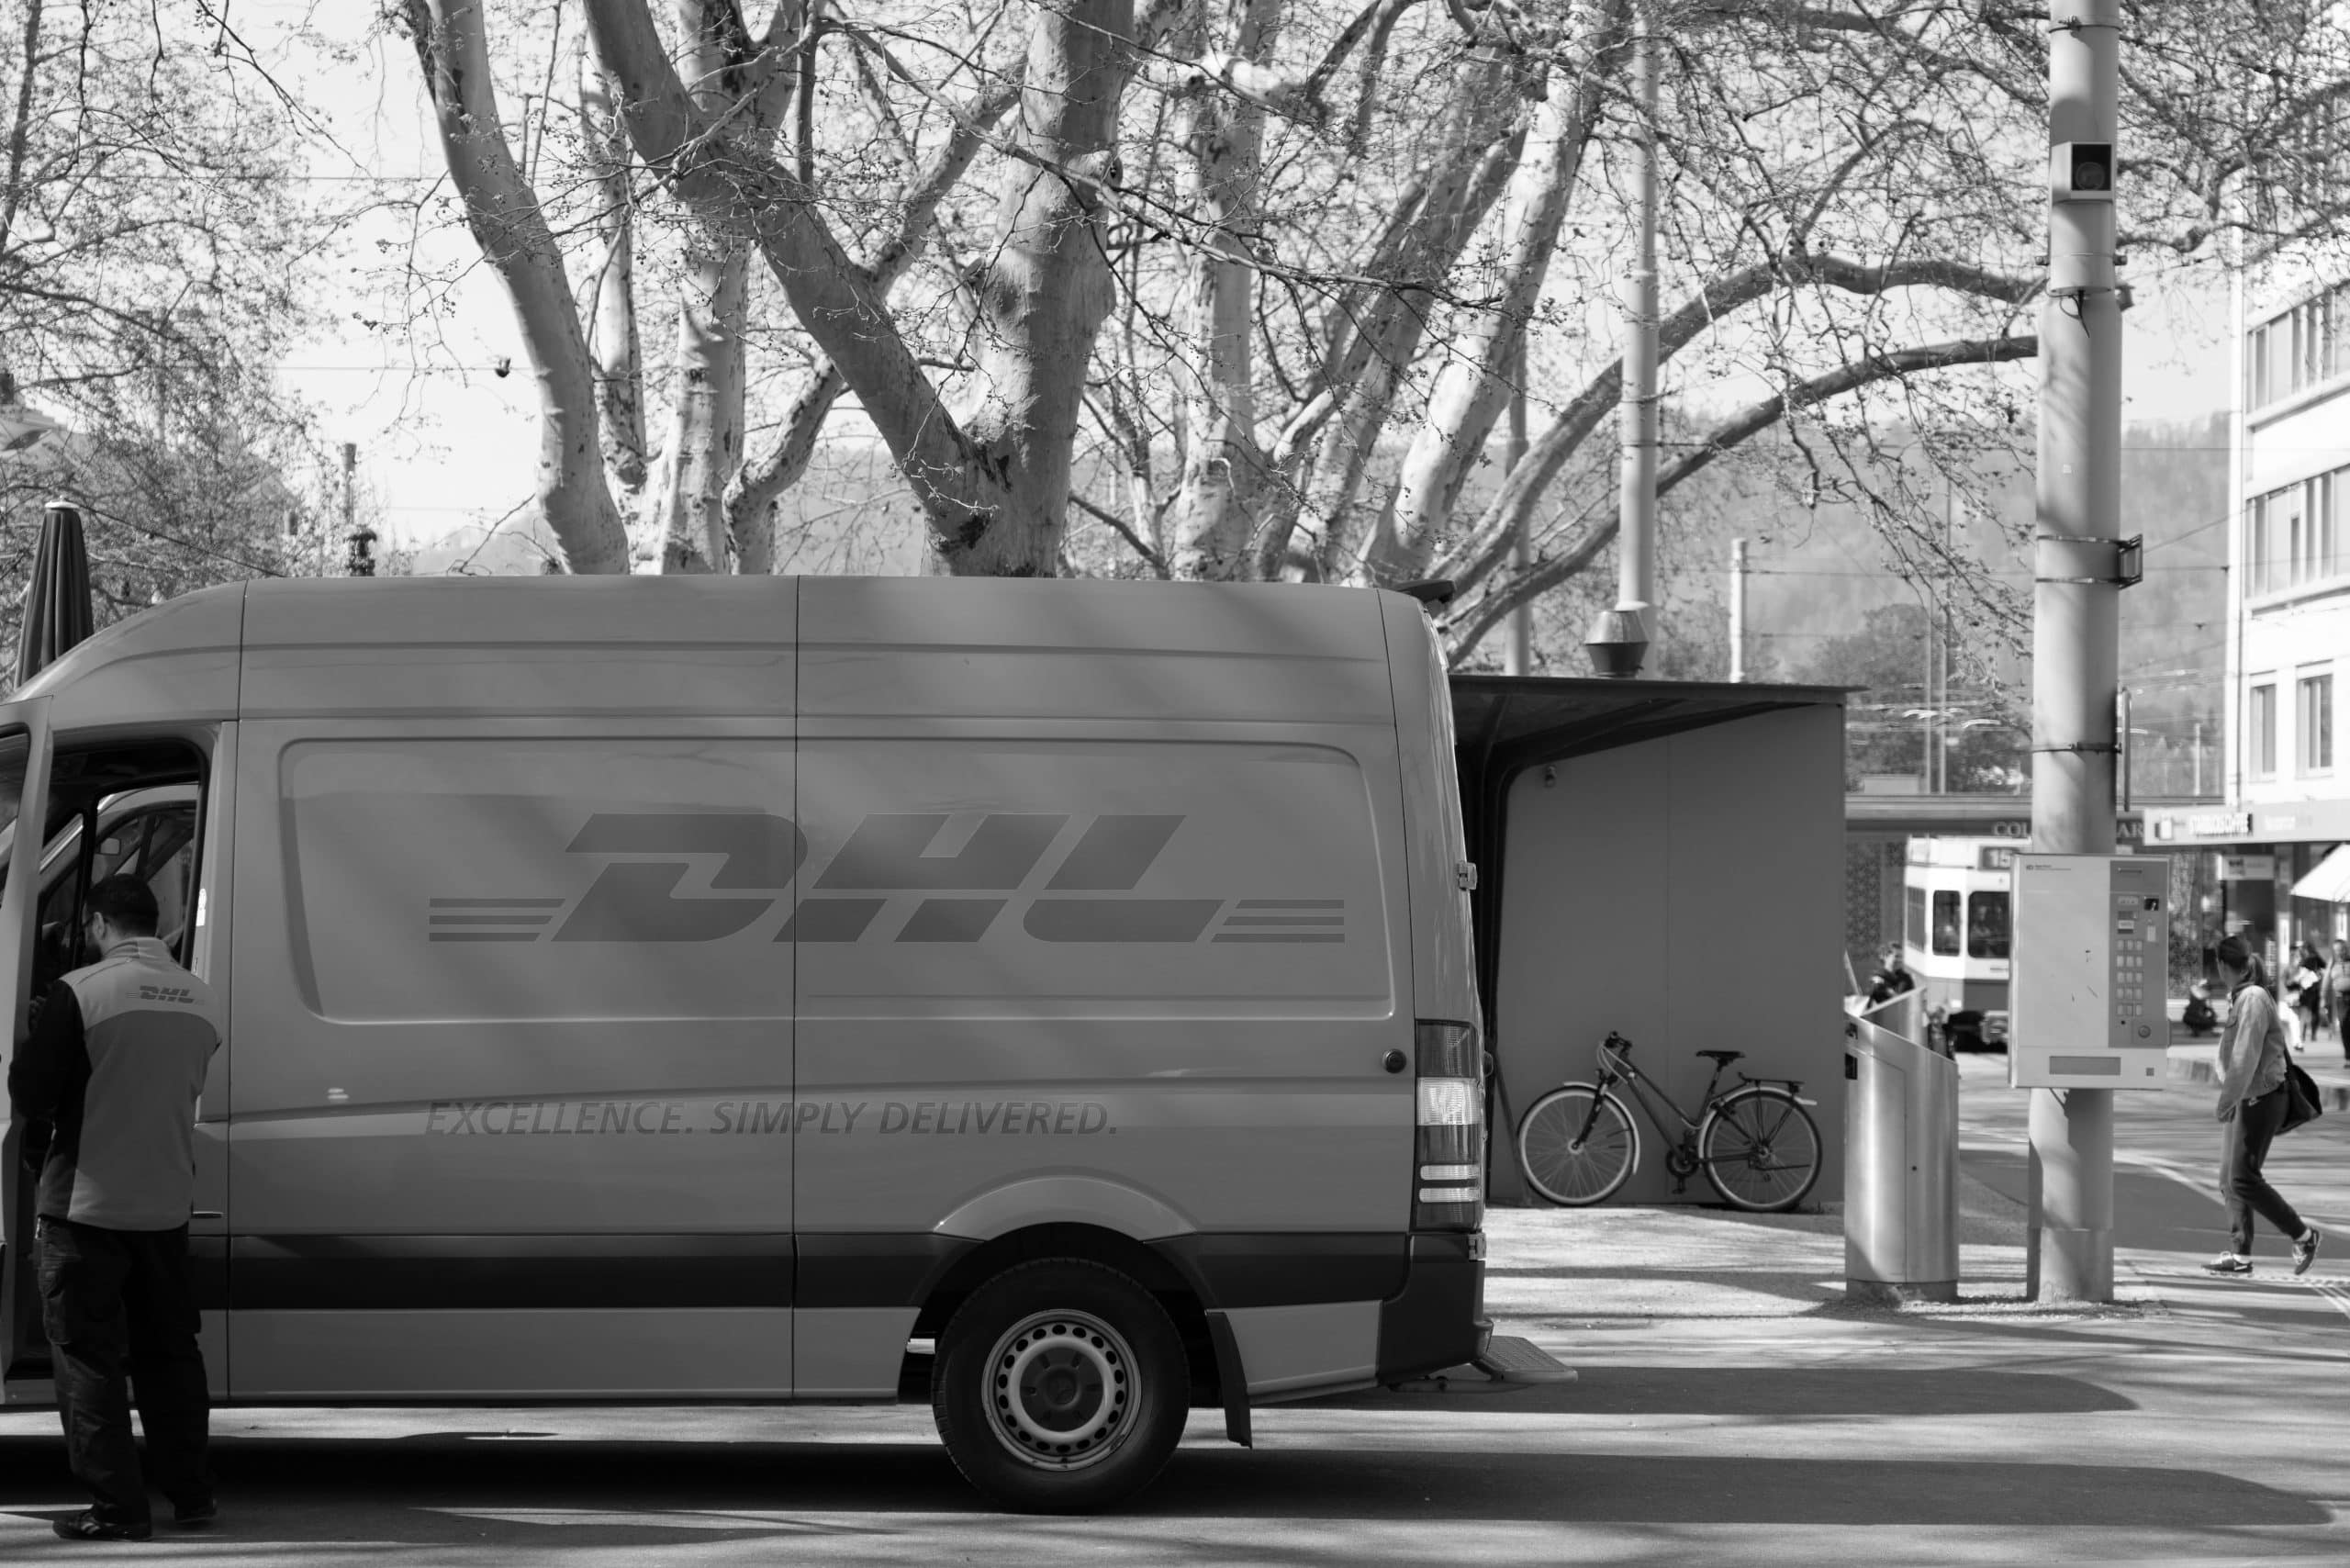 Image of a DHL bus and delivery man